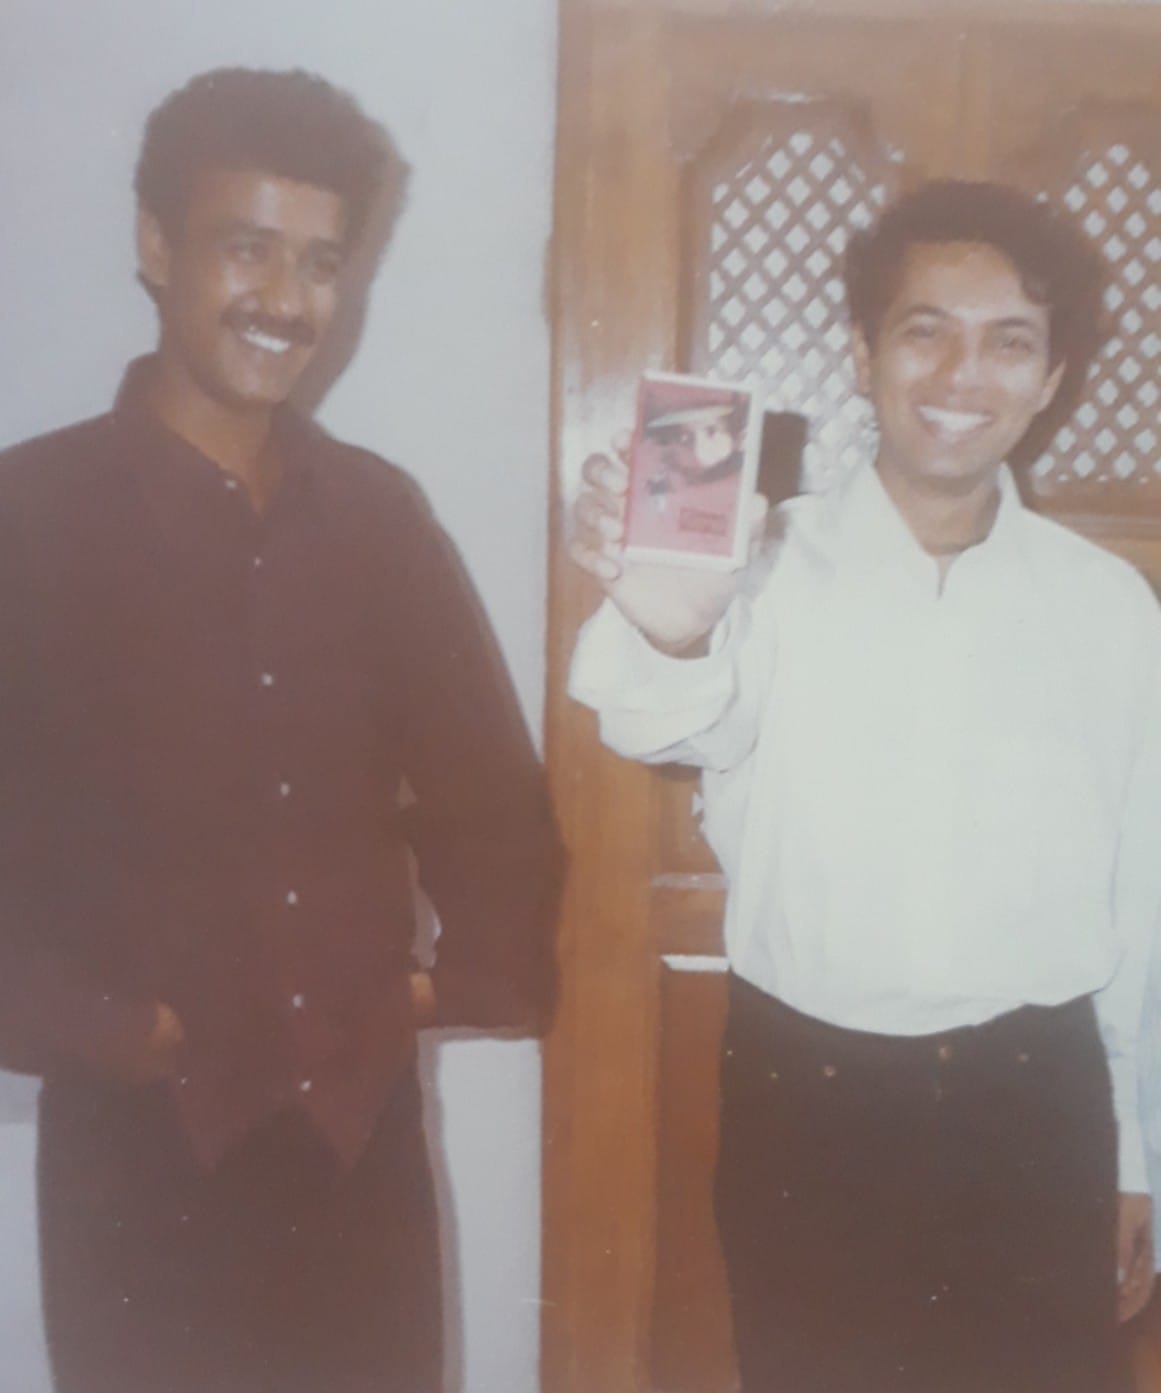 Madhu Mantena (left) in his teens